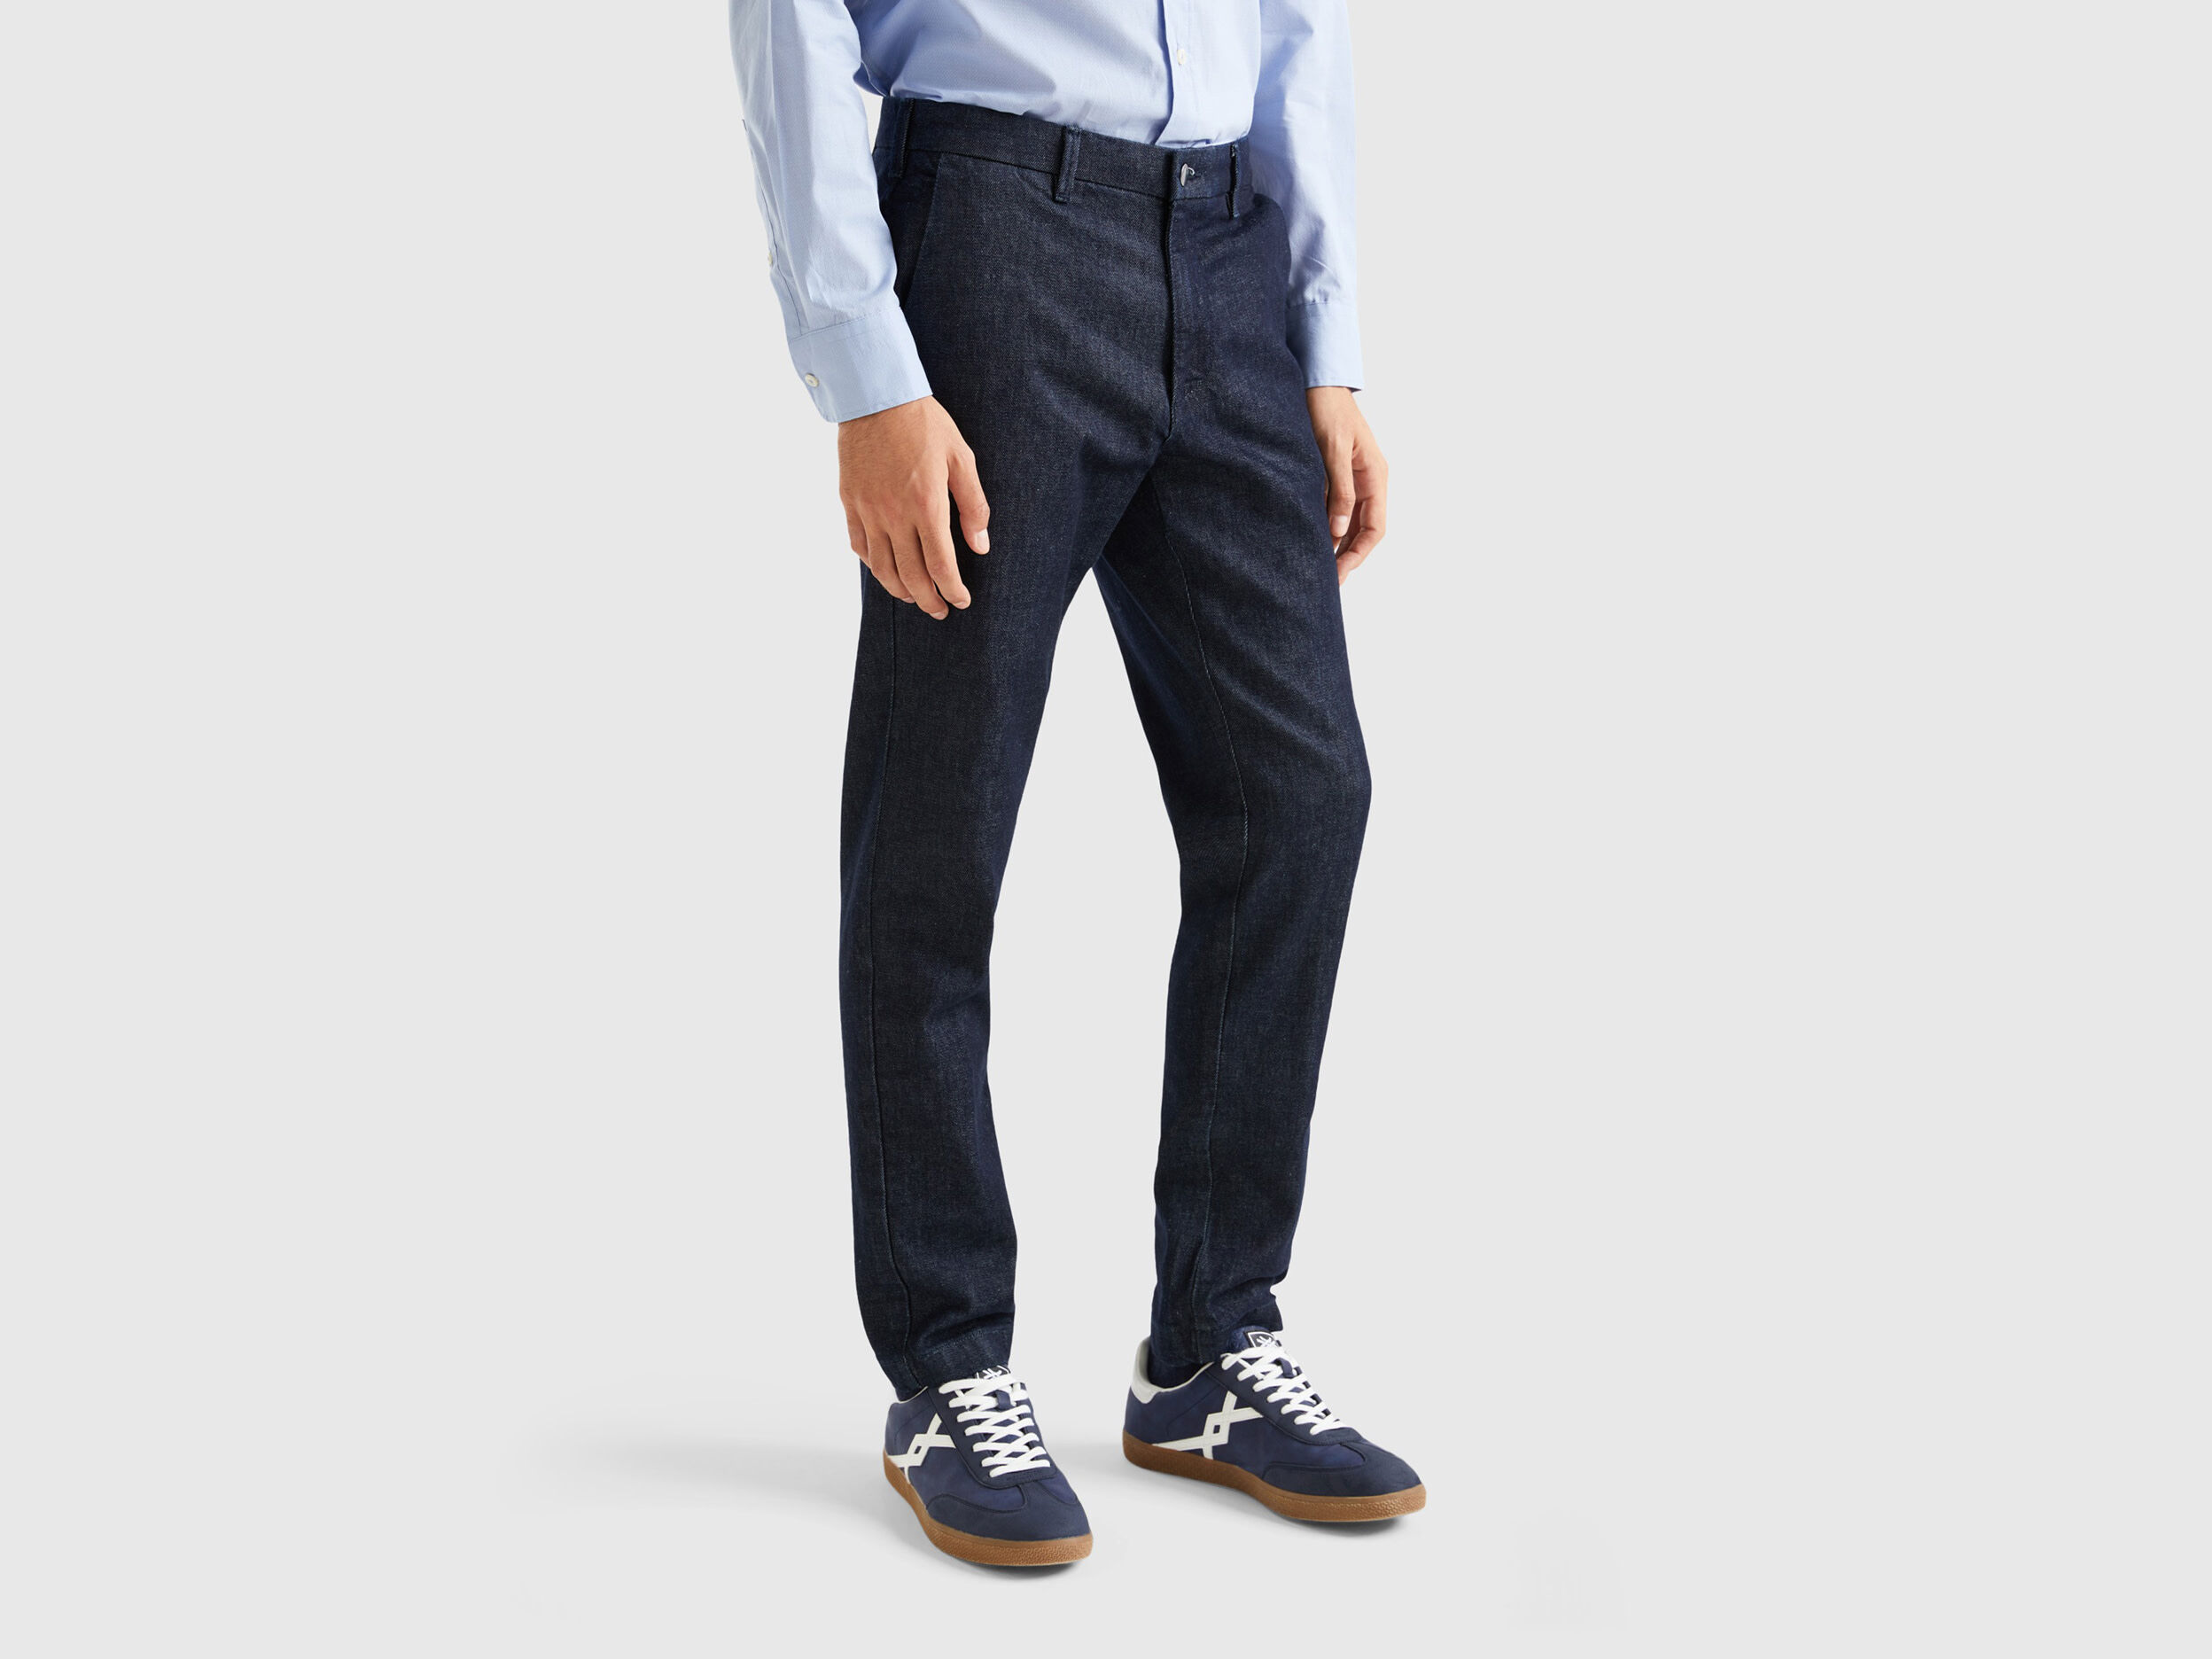 Chinos pants for men - A True sweet spot